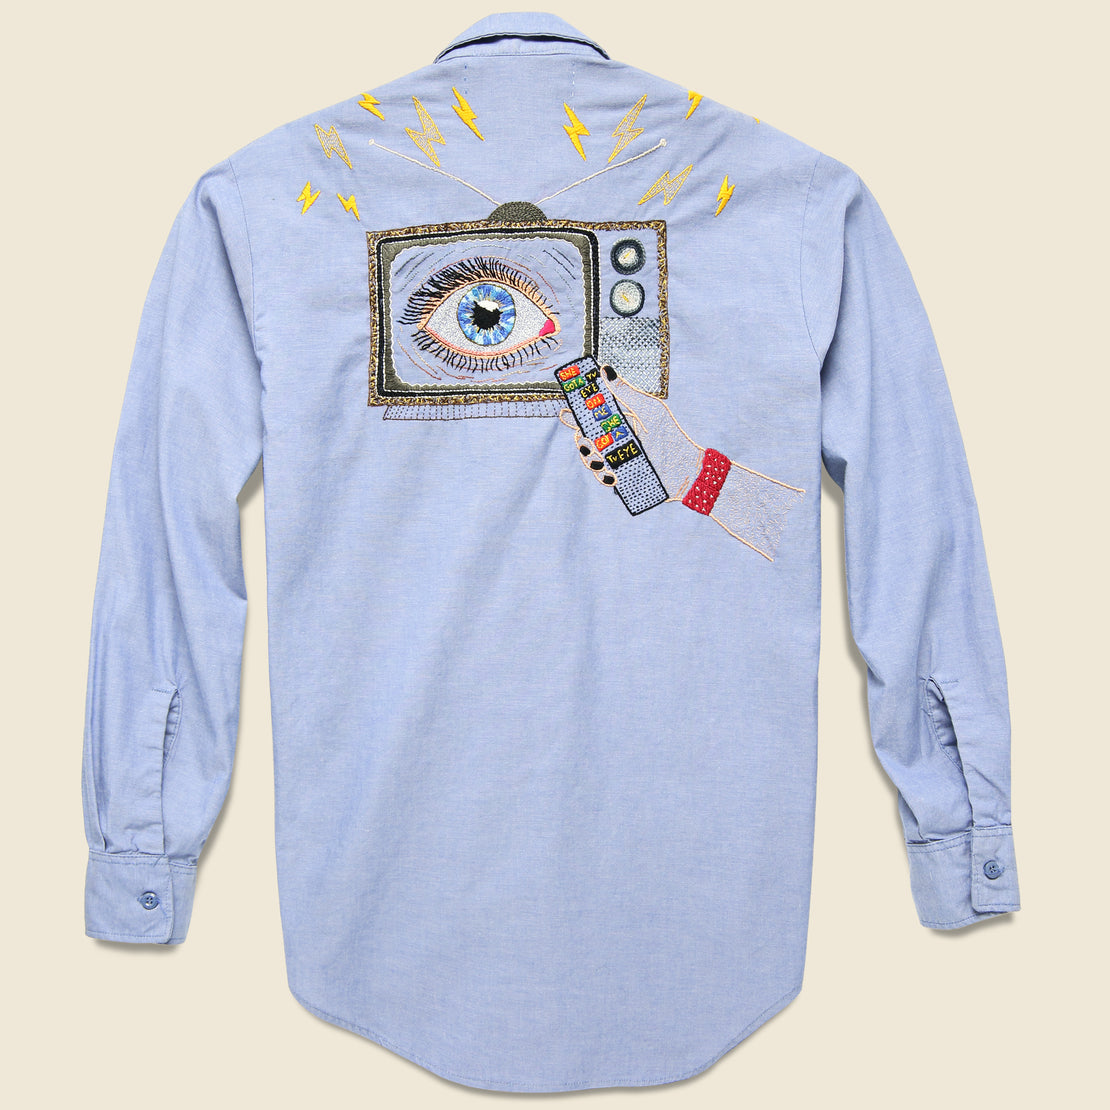 Jolly Knot Club Embroidered Chambray Shirt - She Got a TV Eye on Me